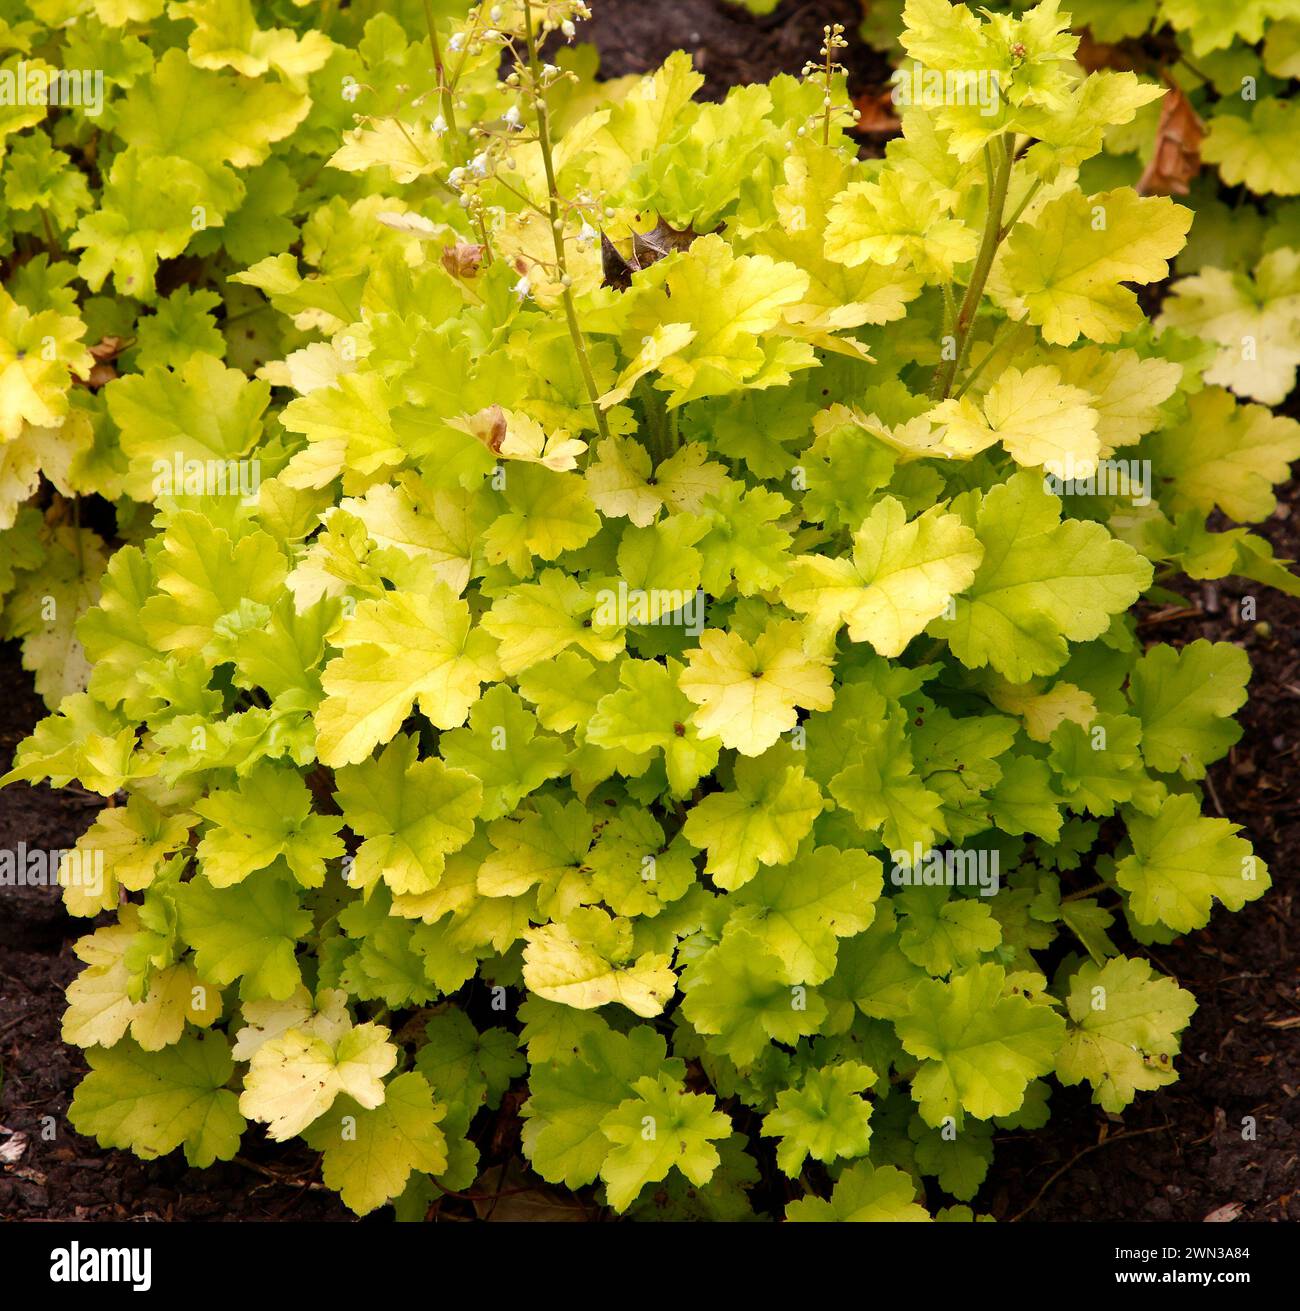 Closeup of the lime green frilled leaves of the low growing perennial garden plant heuchera lime marmalade. Stock Photo